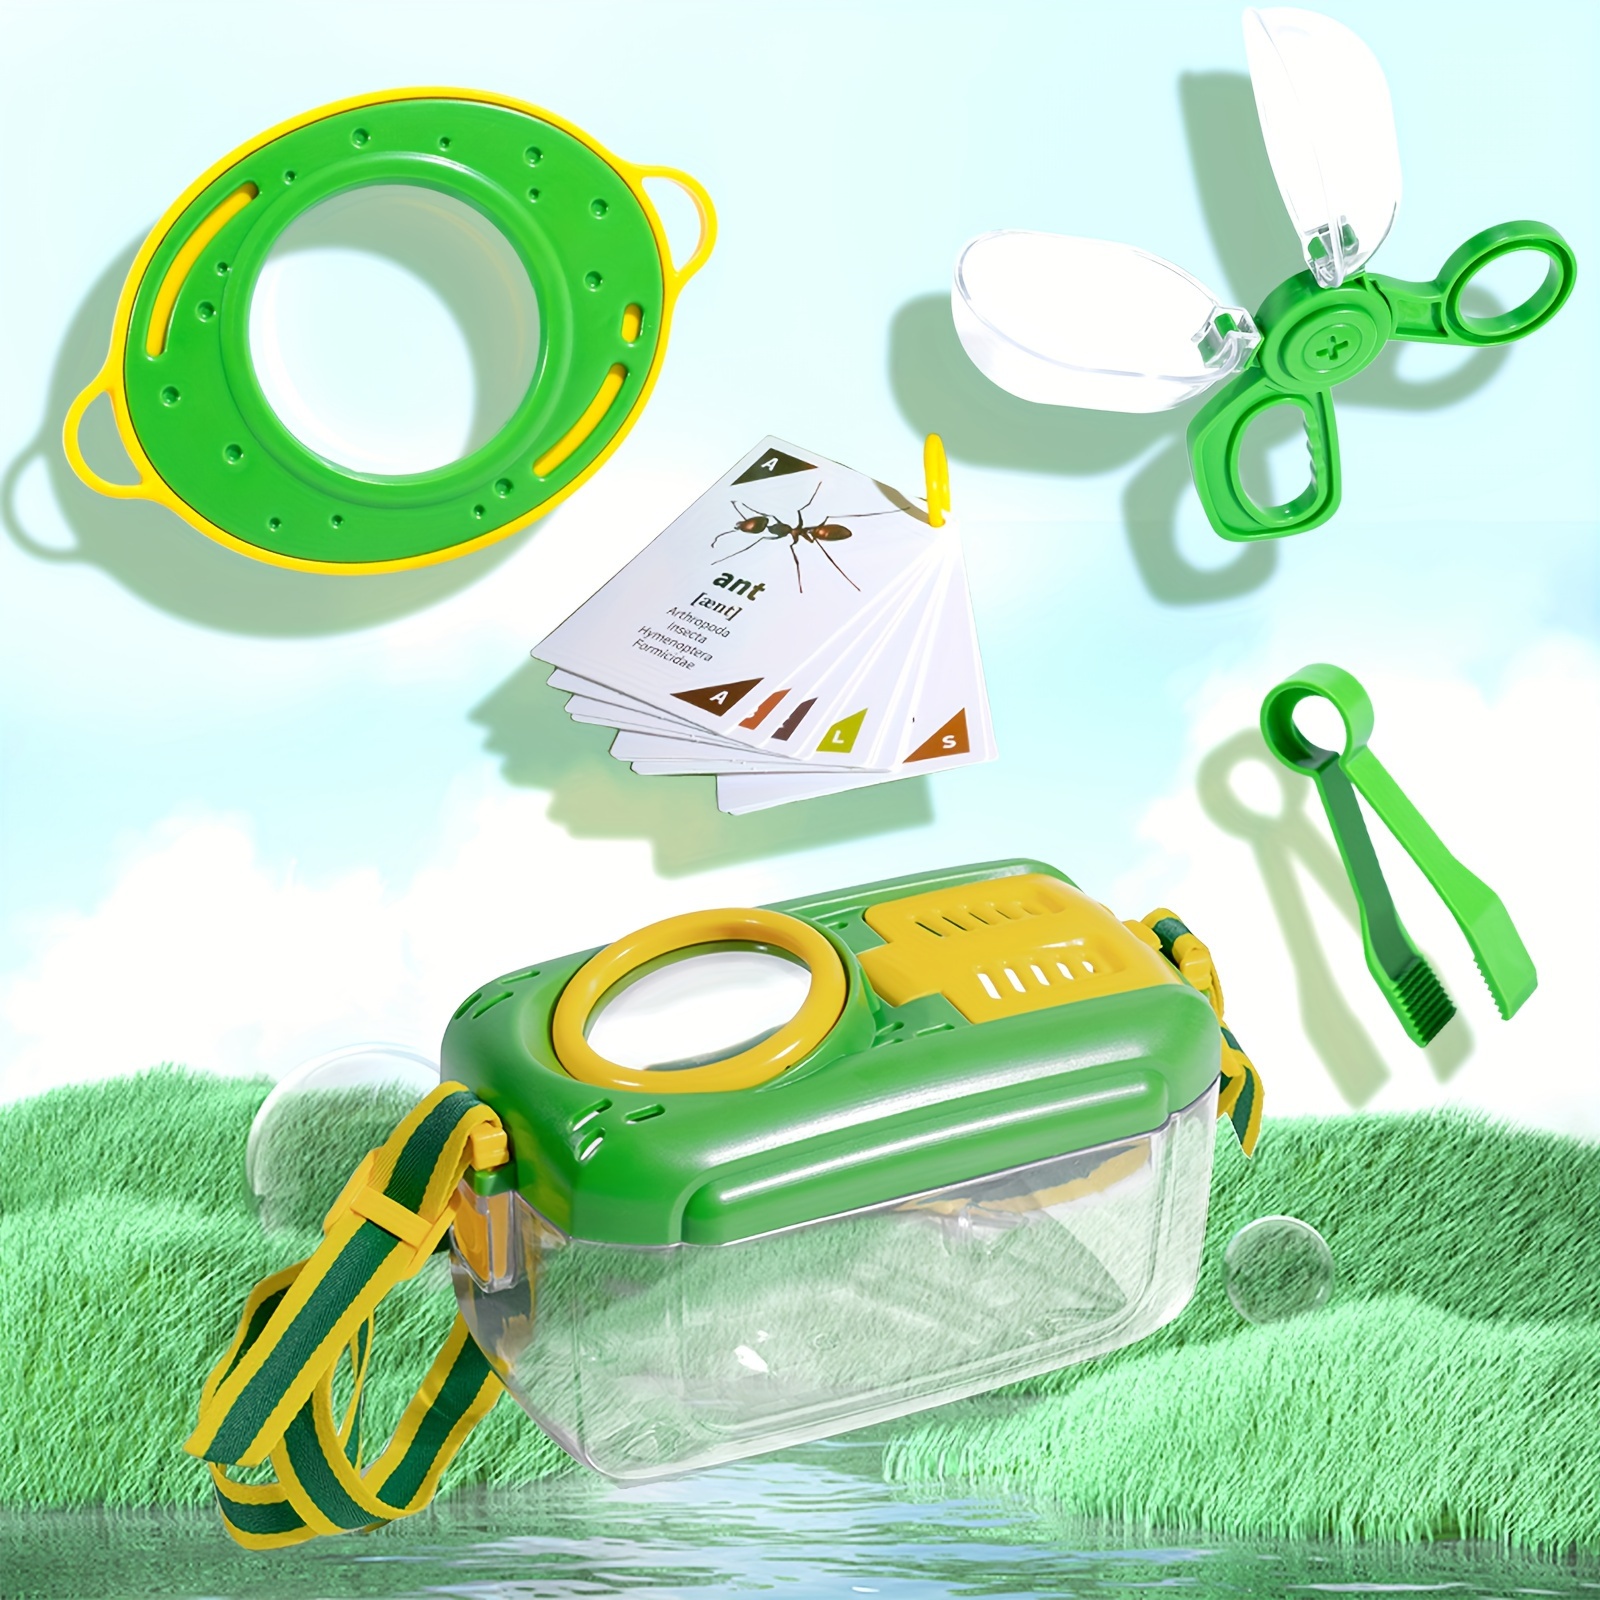 Handheld HD Cartoon Insect Magnifying Glass For Children Creative Science  And Education Toys - Kindergarten Gifts Birthday Gifts